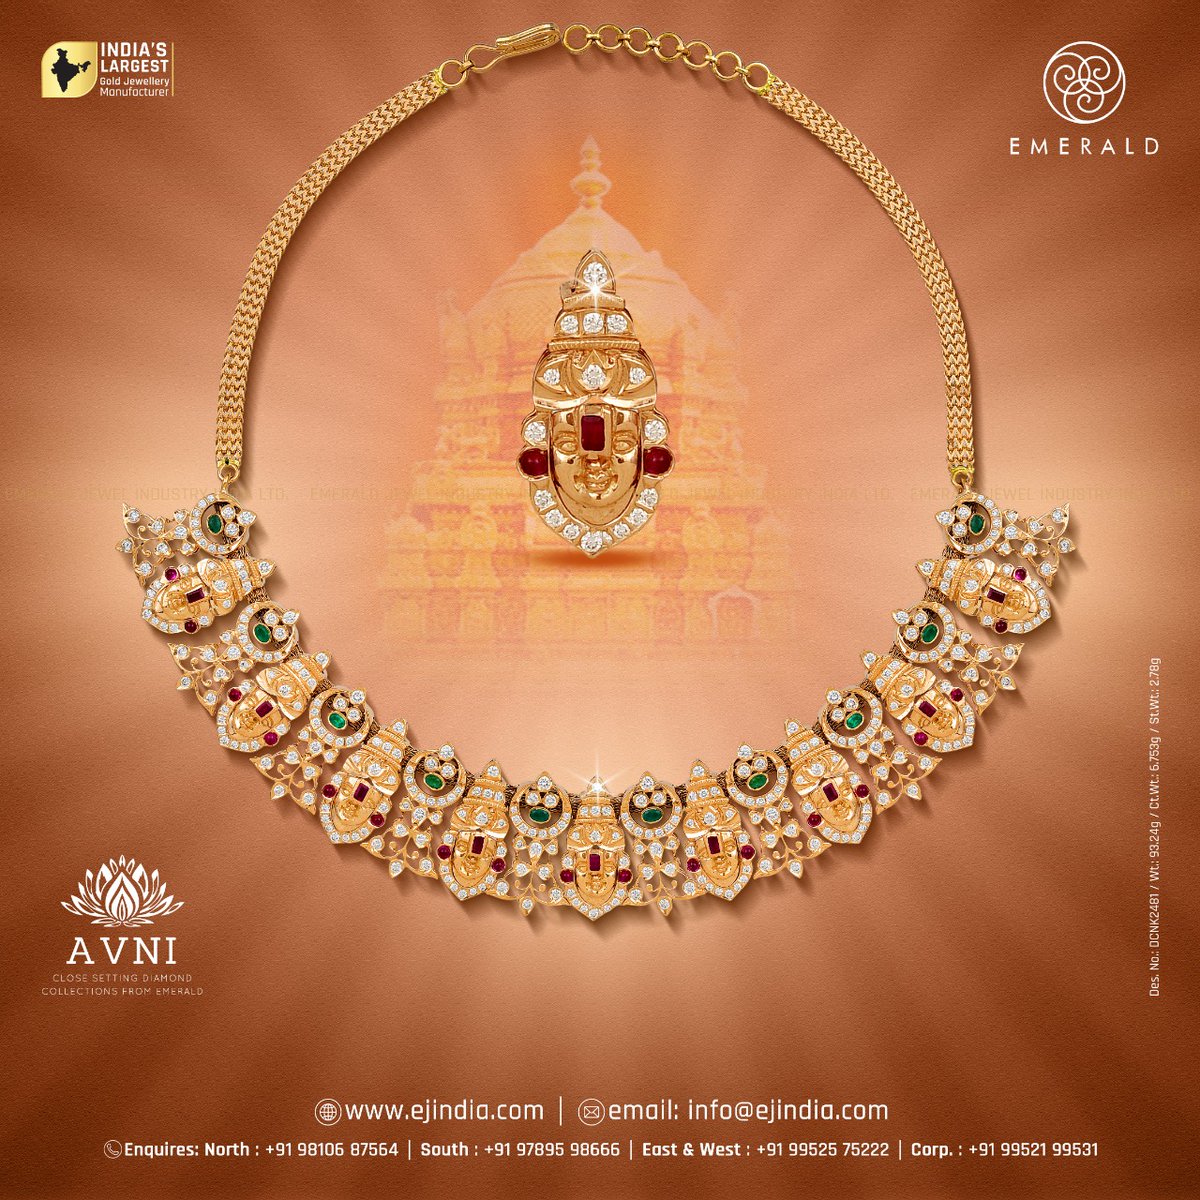 Uniquely carved out of diamonds and dedicatedly crafted with honour, Lord Balaji, infused with life and glory, warmly embraces you. 
Keep the light in your heart alive with our most prized treasury from the Avni collection.
.
.
.
.
.
#traditionalcollection #avnicollection